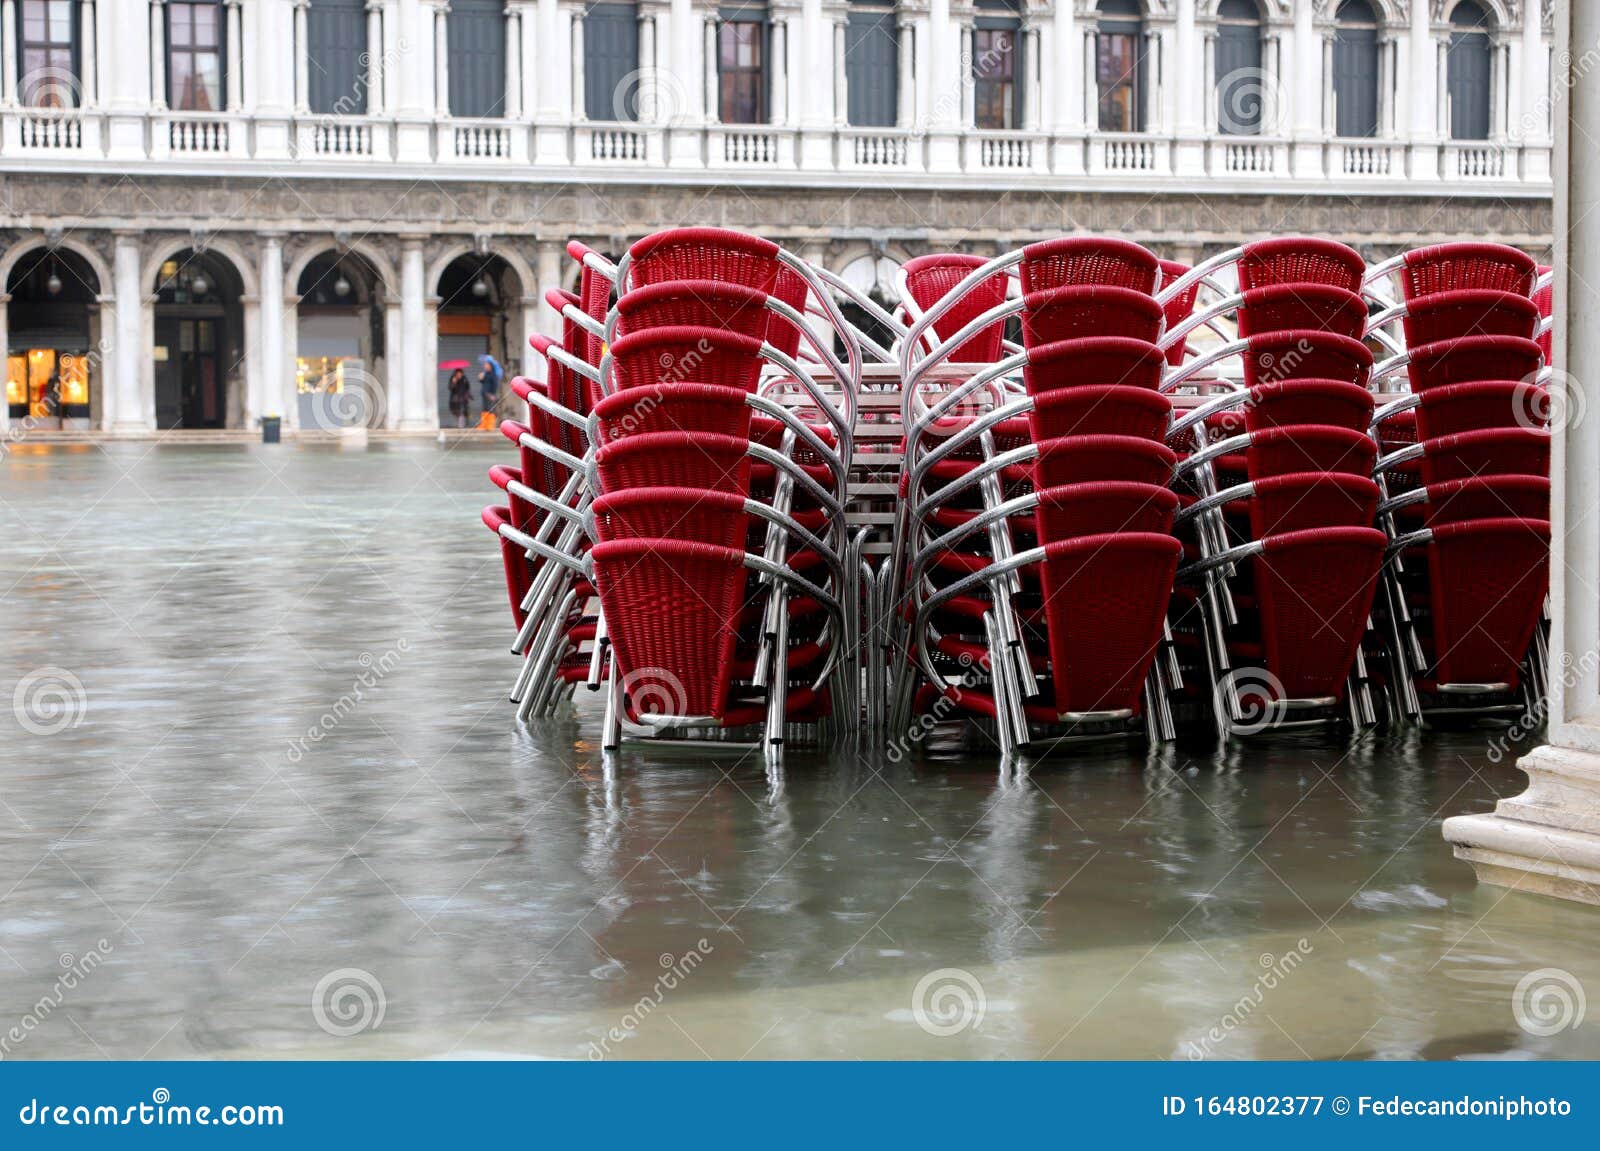 red chairs of a restaurant in venice italy with high water